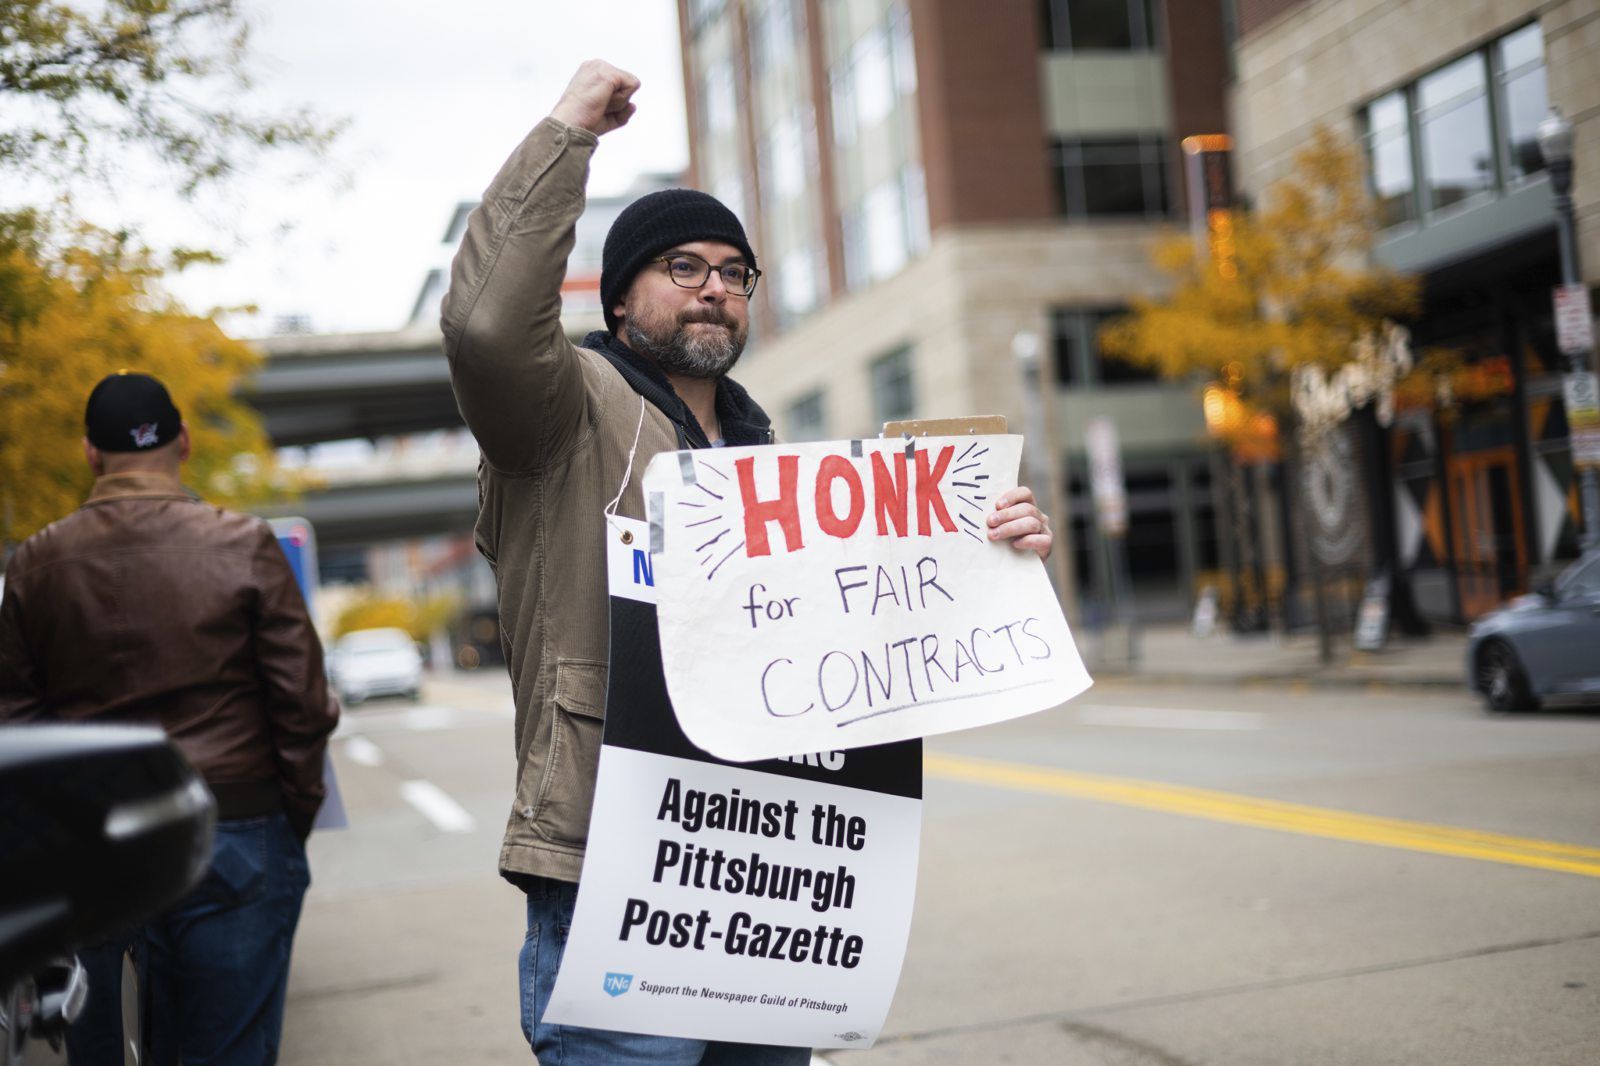 One year on strike: Pittsburgh Post-Gazette journalists are frustrated but  remain resolute - Poynter